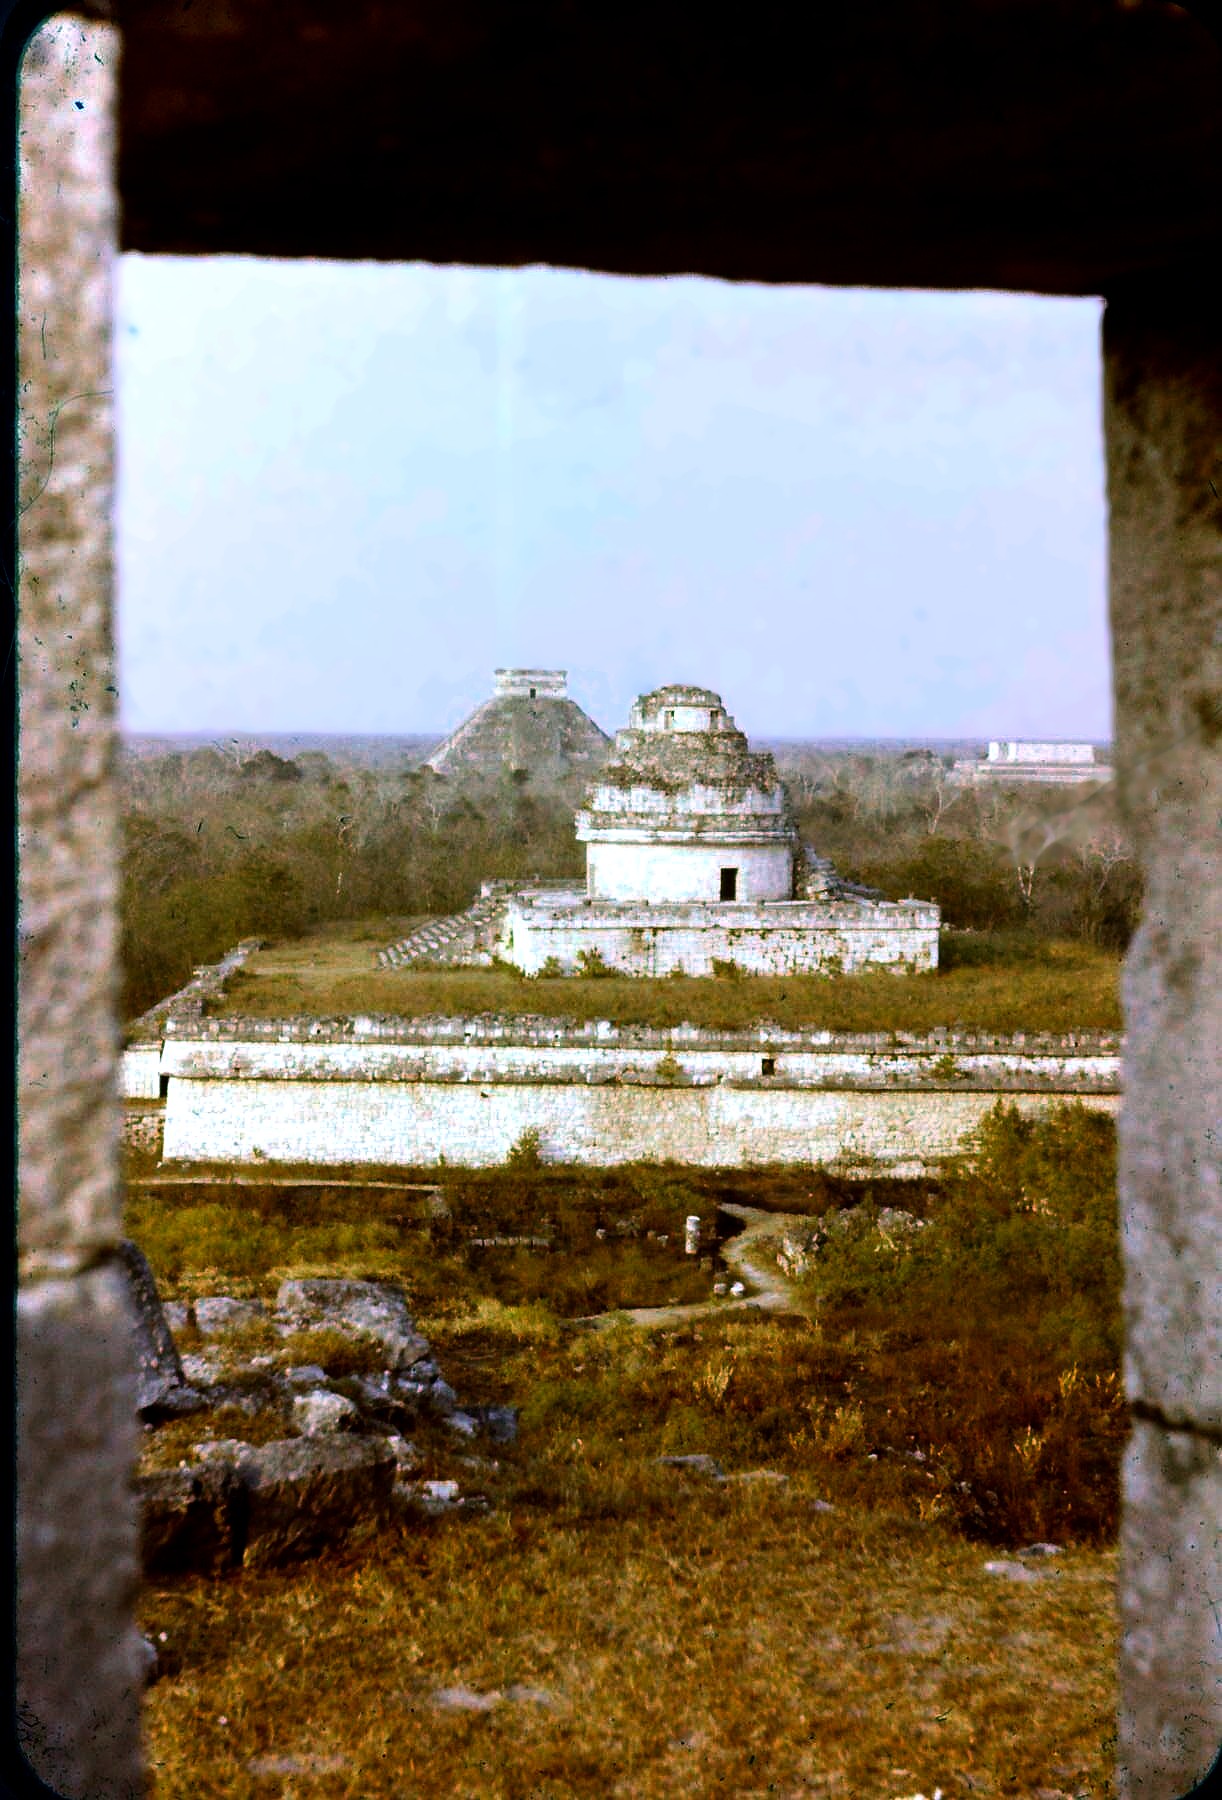 Chichen Itza astronomical observatory, called El Caracol, in the Yucatan, Mexico